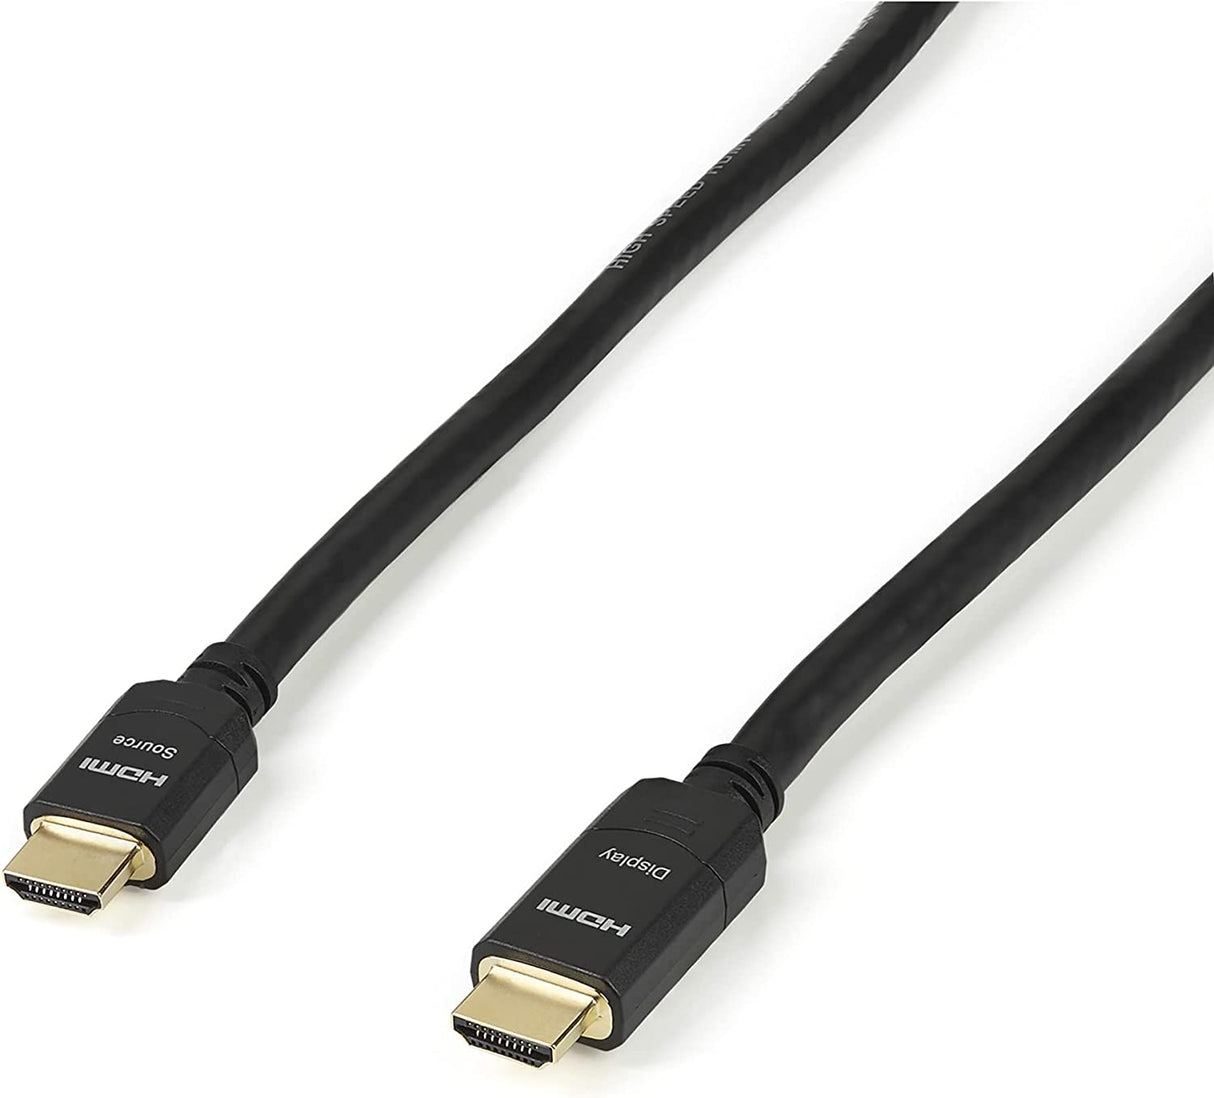 StarTech.com 65 ft (20m) High Speed HDMI Cable – Male to Male - Active - 28AWG - CL2 Rated In-wall Installation - Ultra HD 4K x 2K - Active HDMI Cable (HDMM20MA) Black 66 ft / 20 m